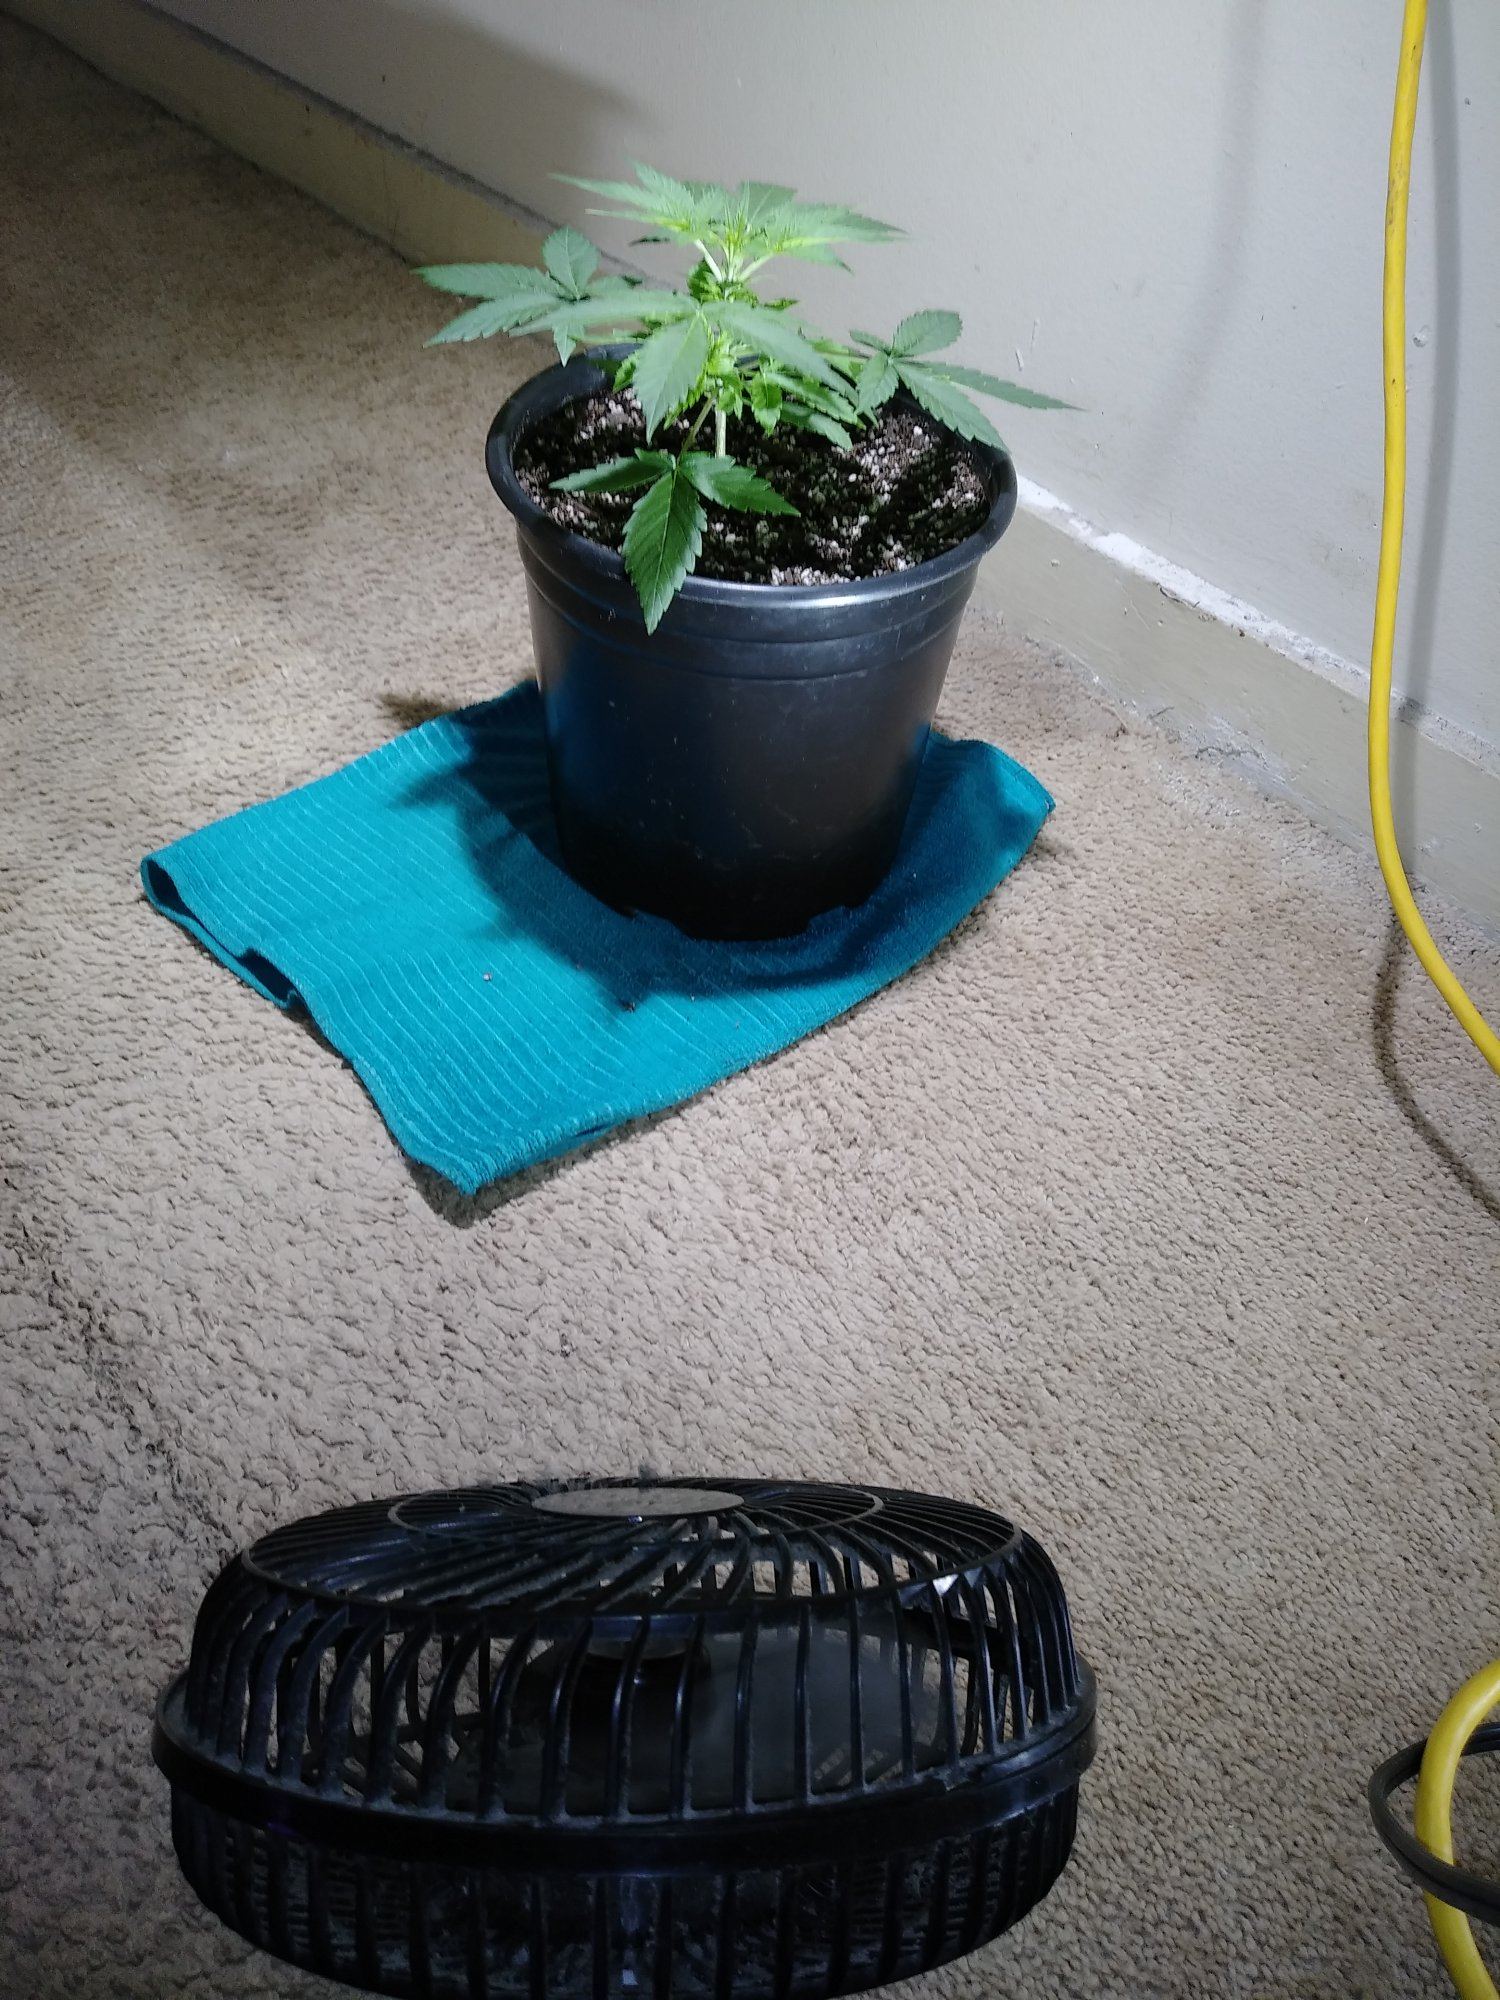 Growing a plant useing spotlights 4